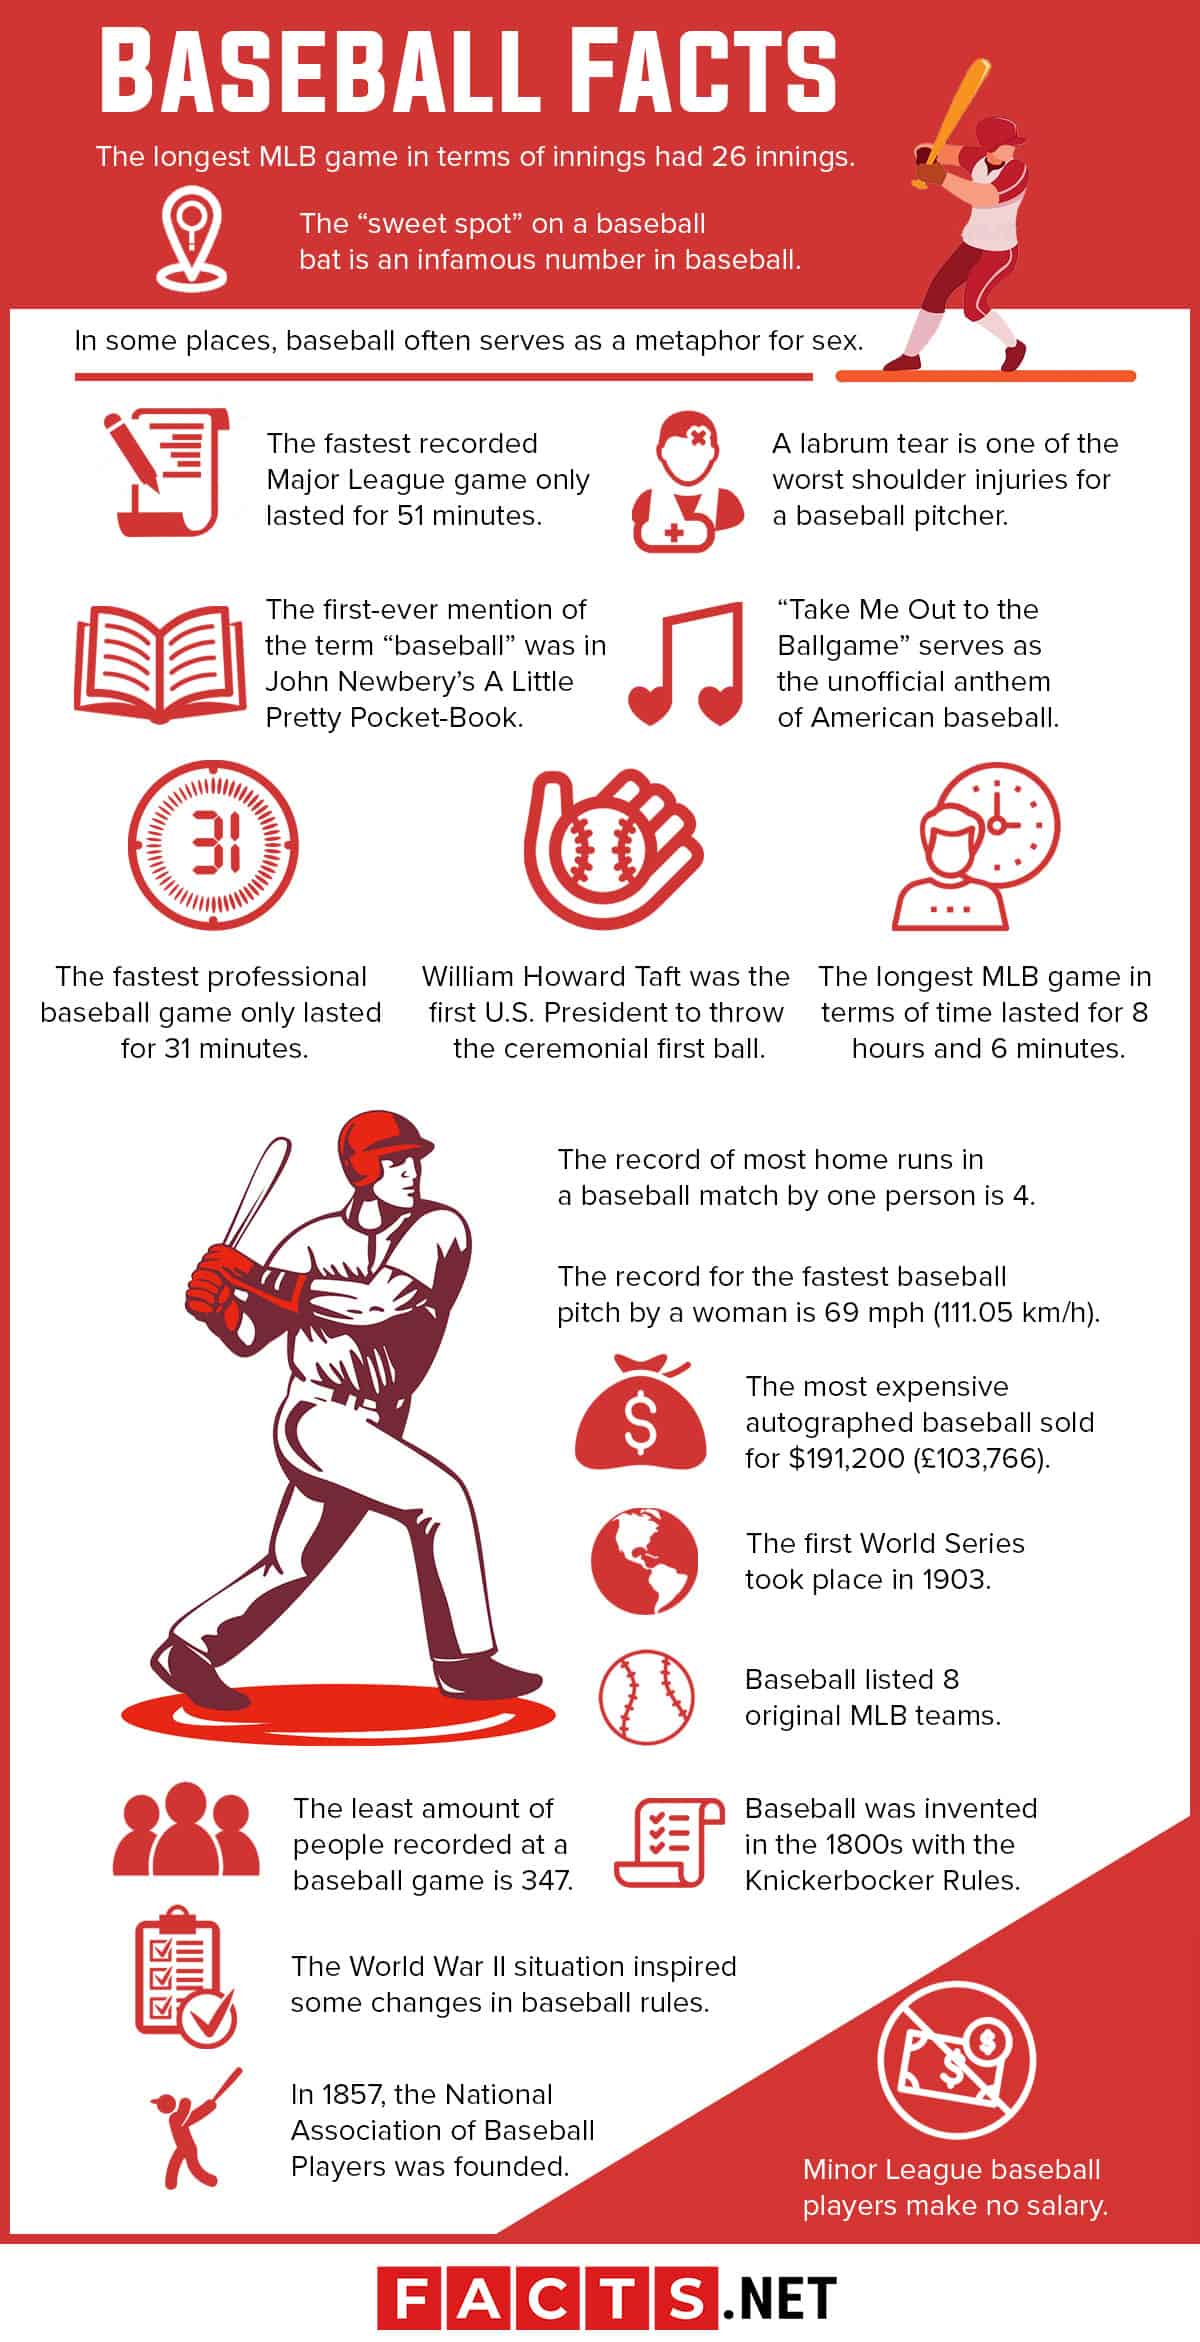 Baseball quiz; Y2, OK? Let's see how well you know baseball facts